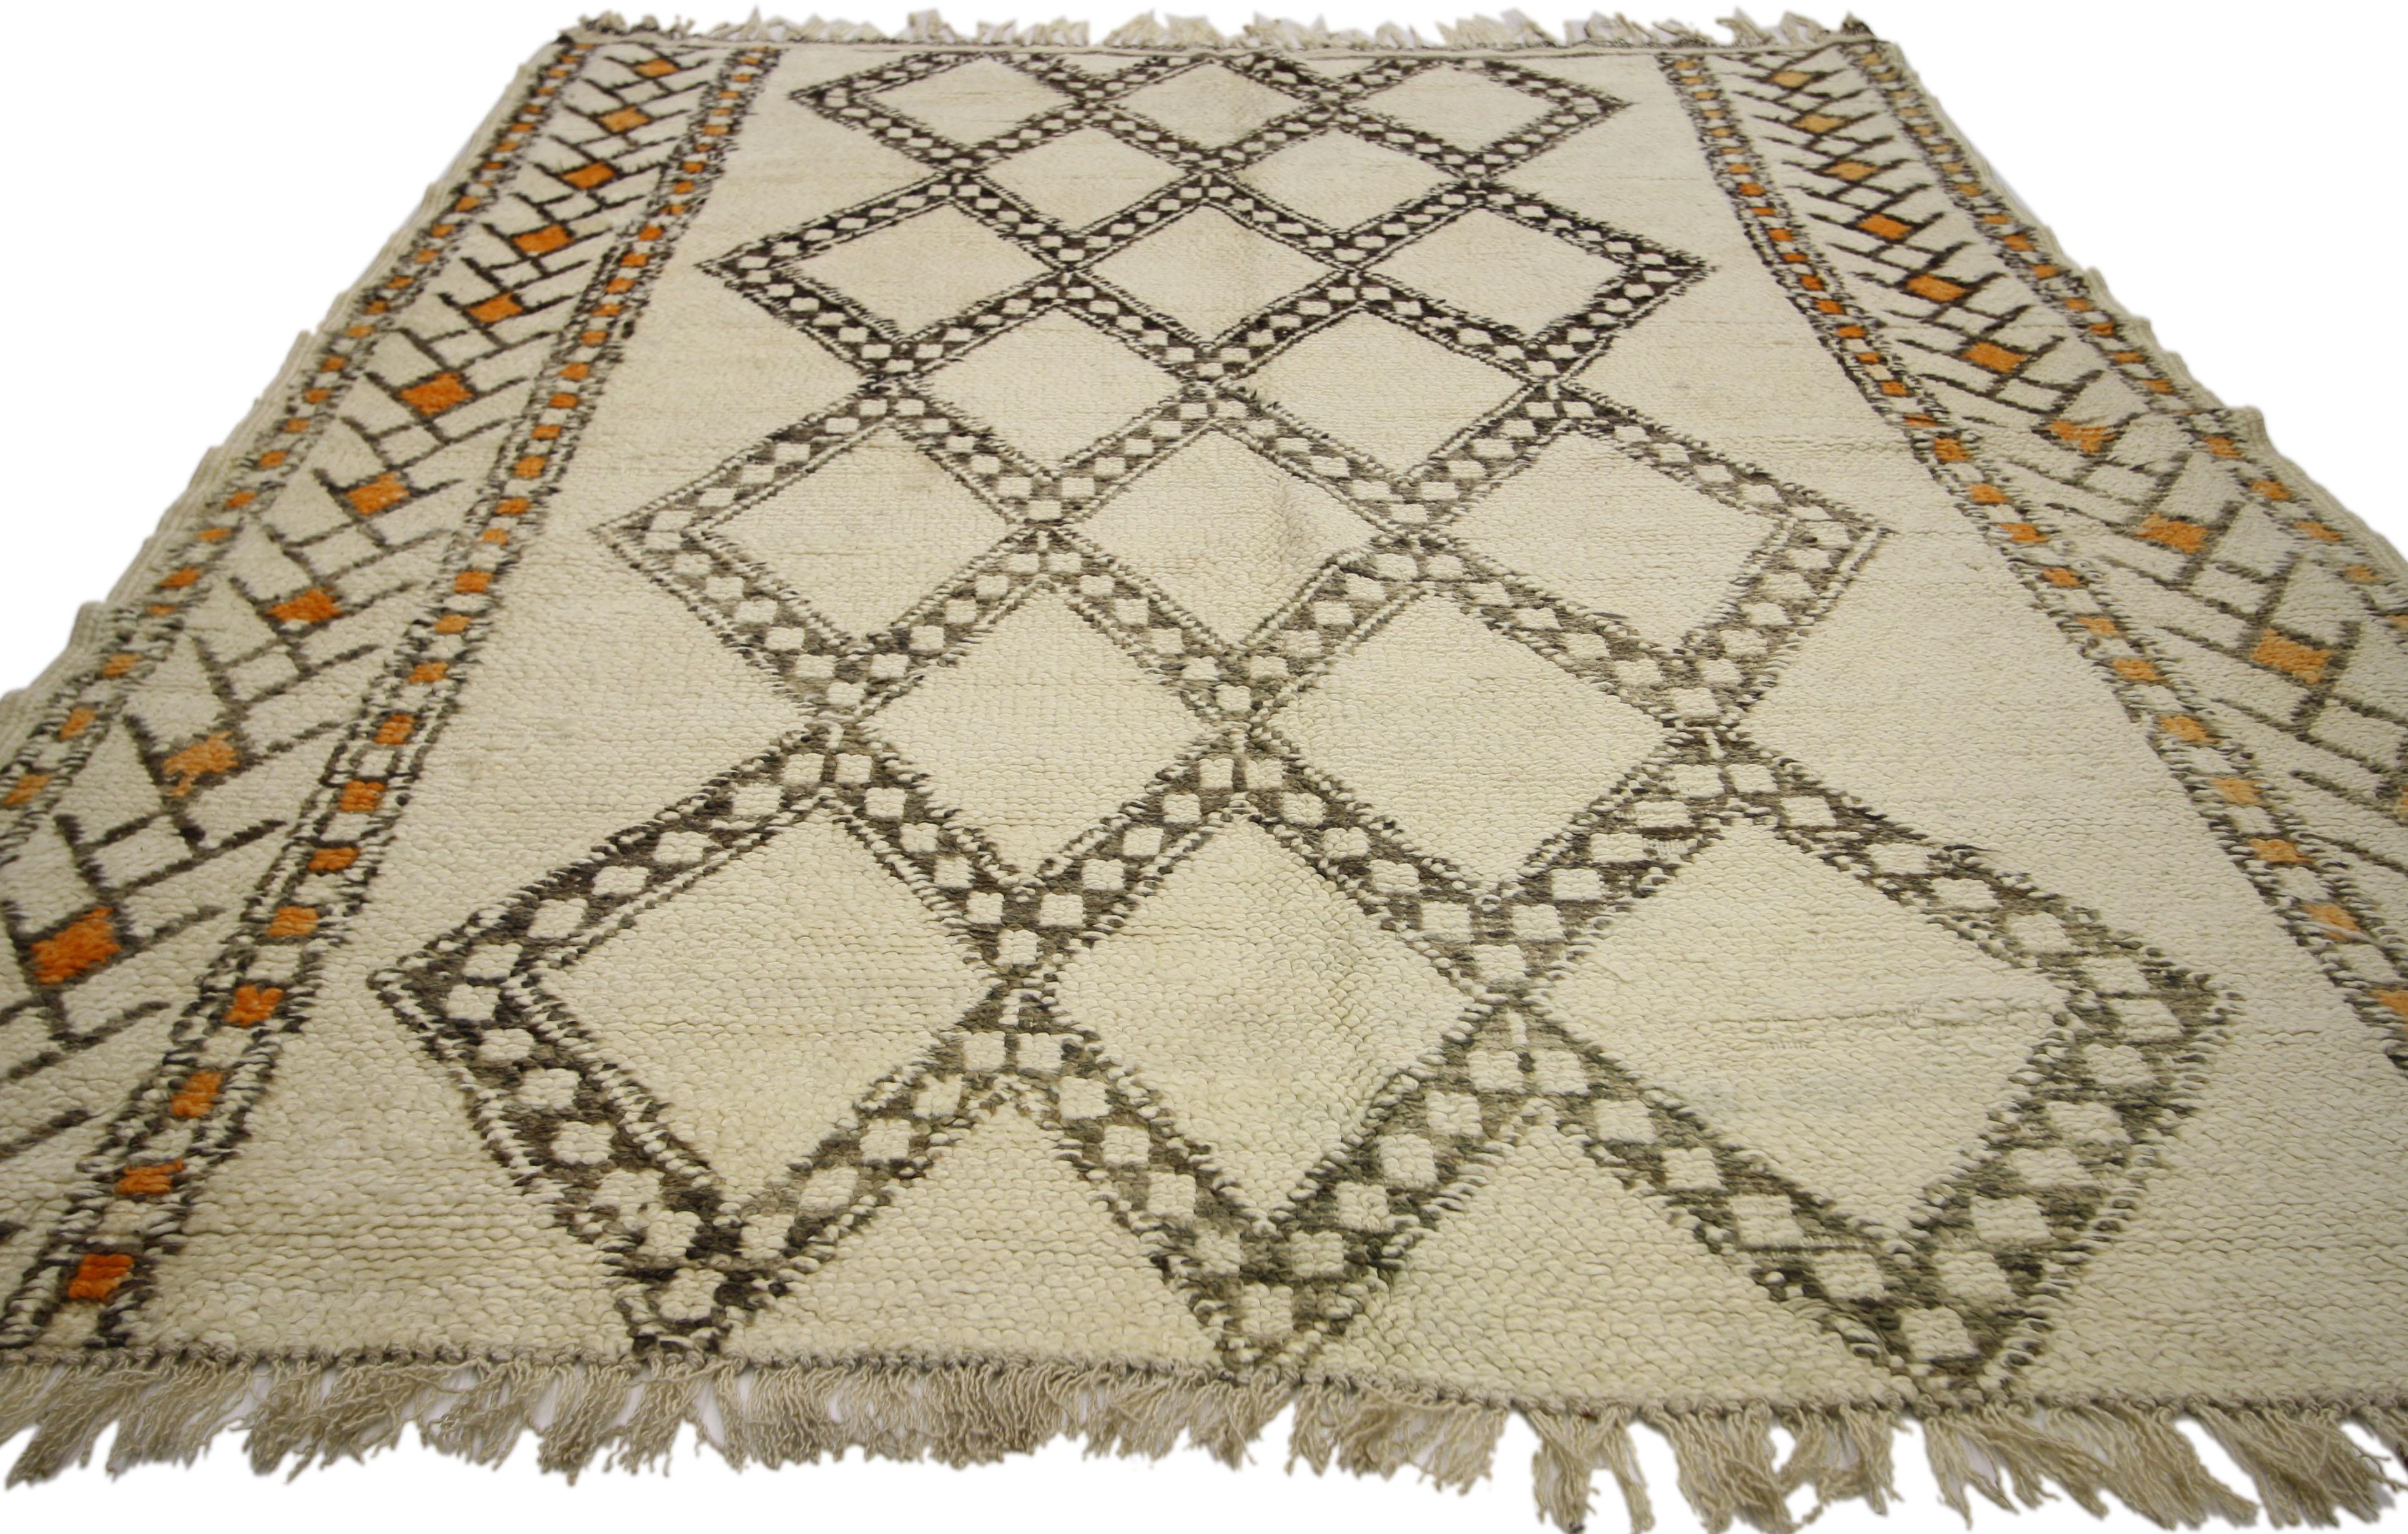 Hand-Knotted Vintage Beni Ourain Moroccan Rug with Tribal Style, Beni Ourain Rug